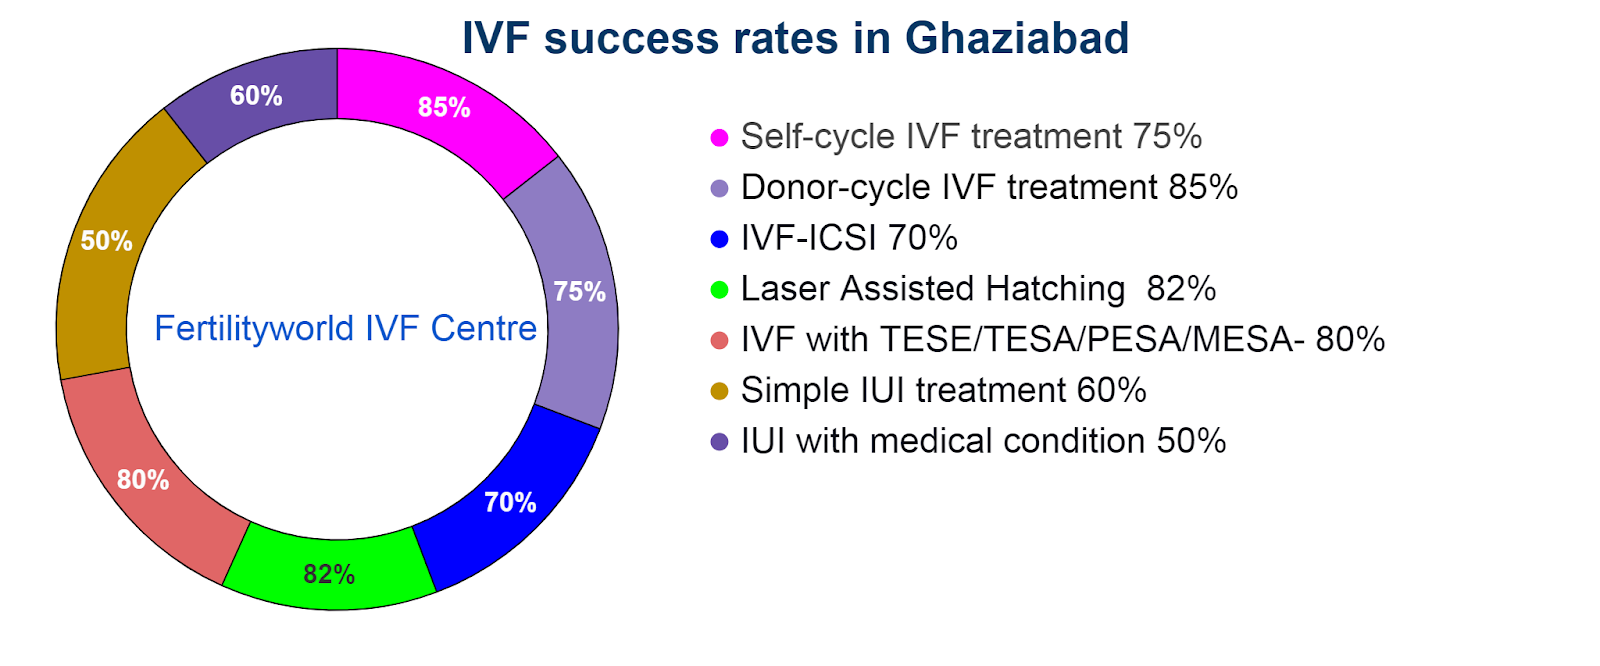  IVF success rate in Ghaziabad?